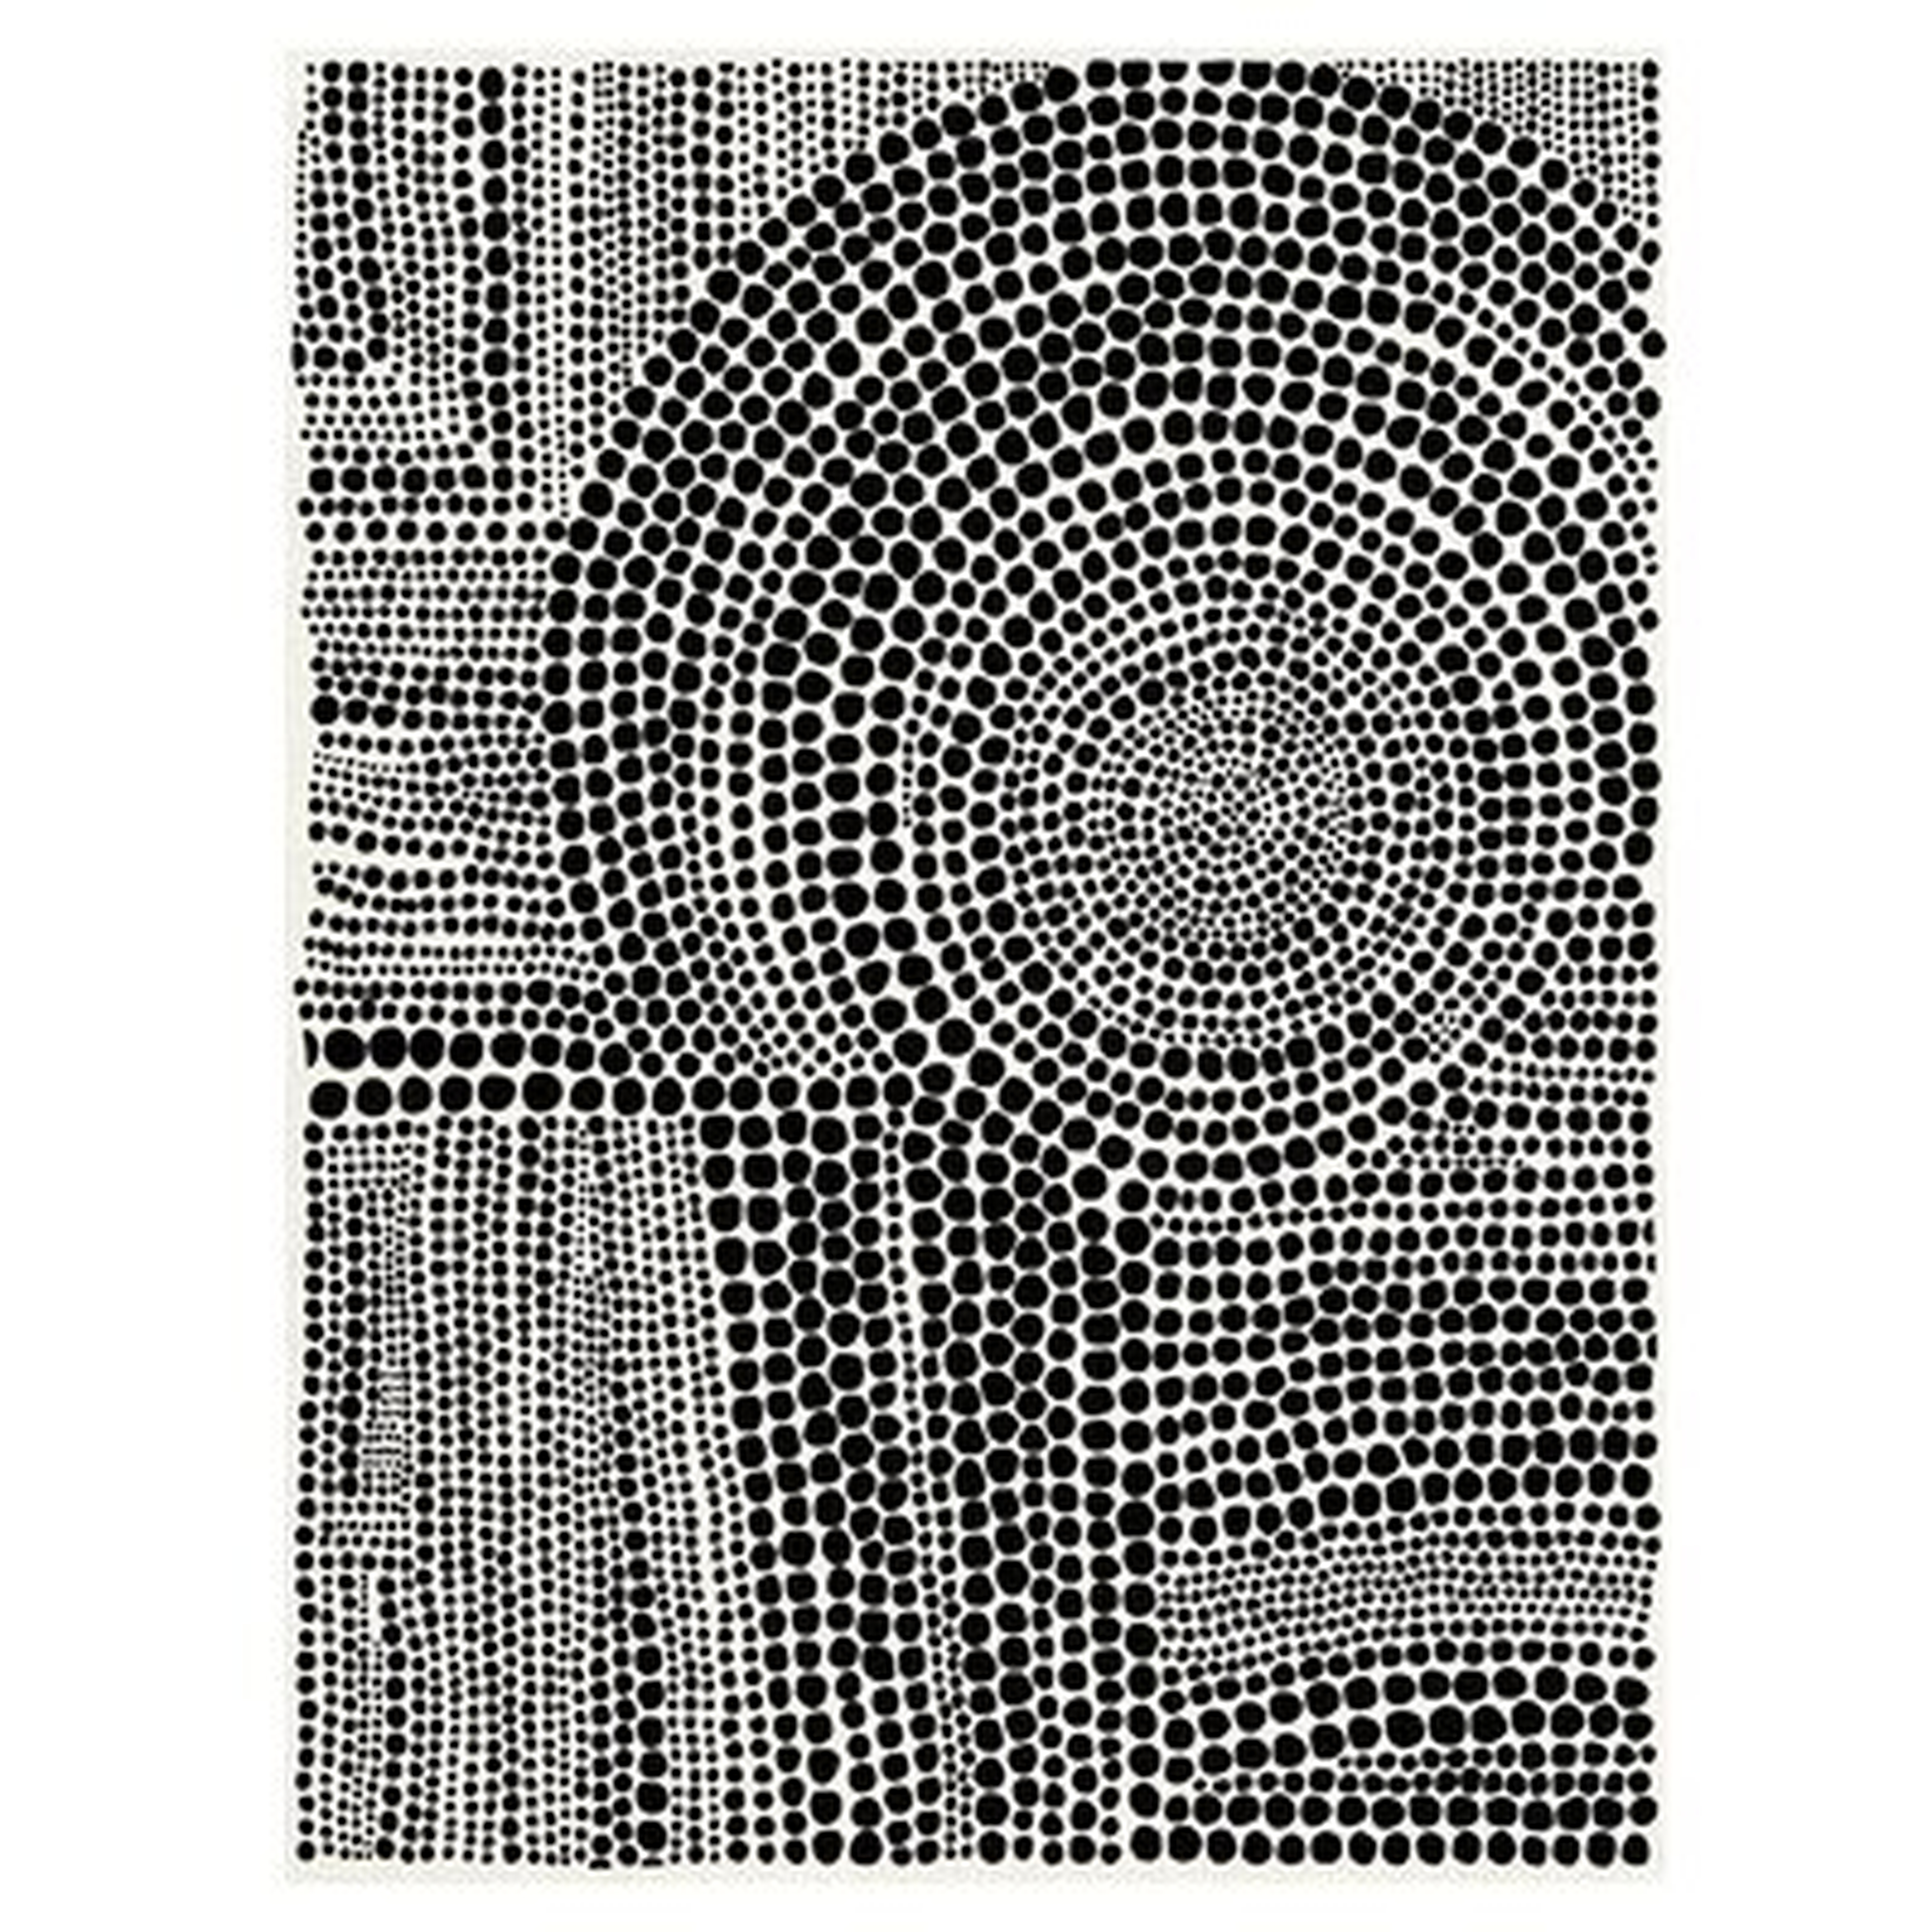 'Clustered Dots B' - Unframed Painting Print on Canvas - Wayfair